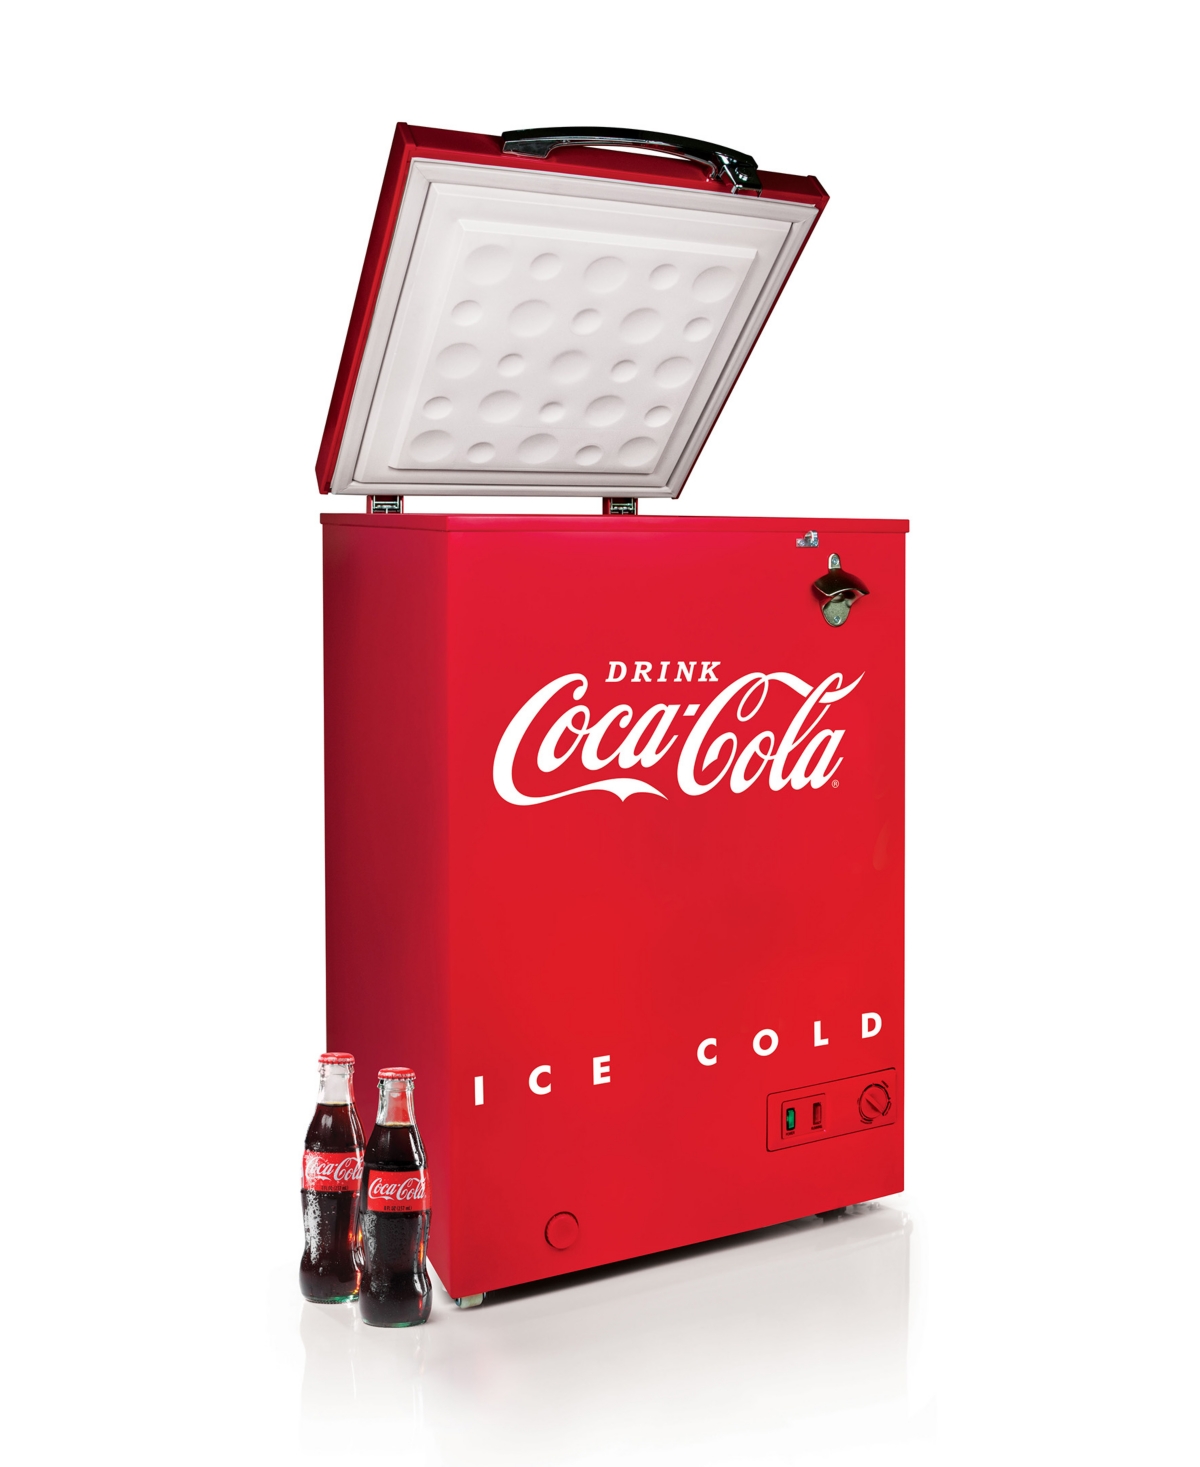 Coca-cola 3.5 Cubic Feet Refrigerator Chest Freezer In Red